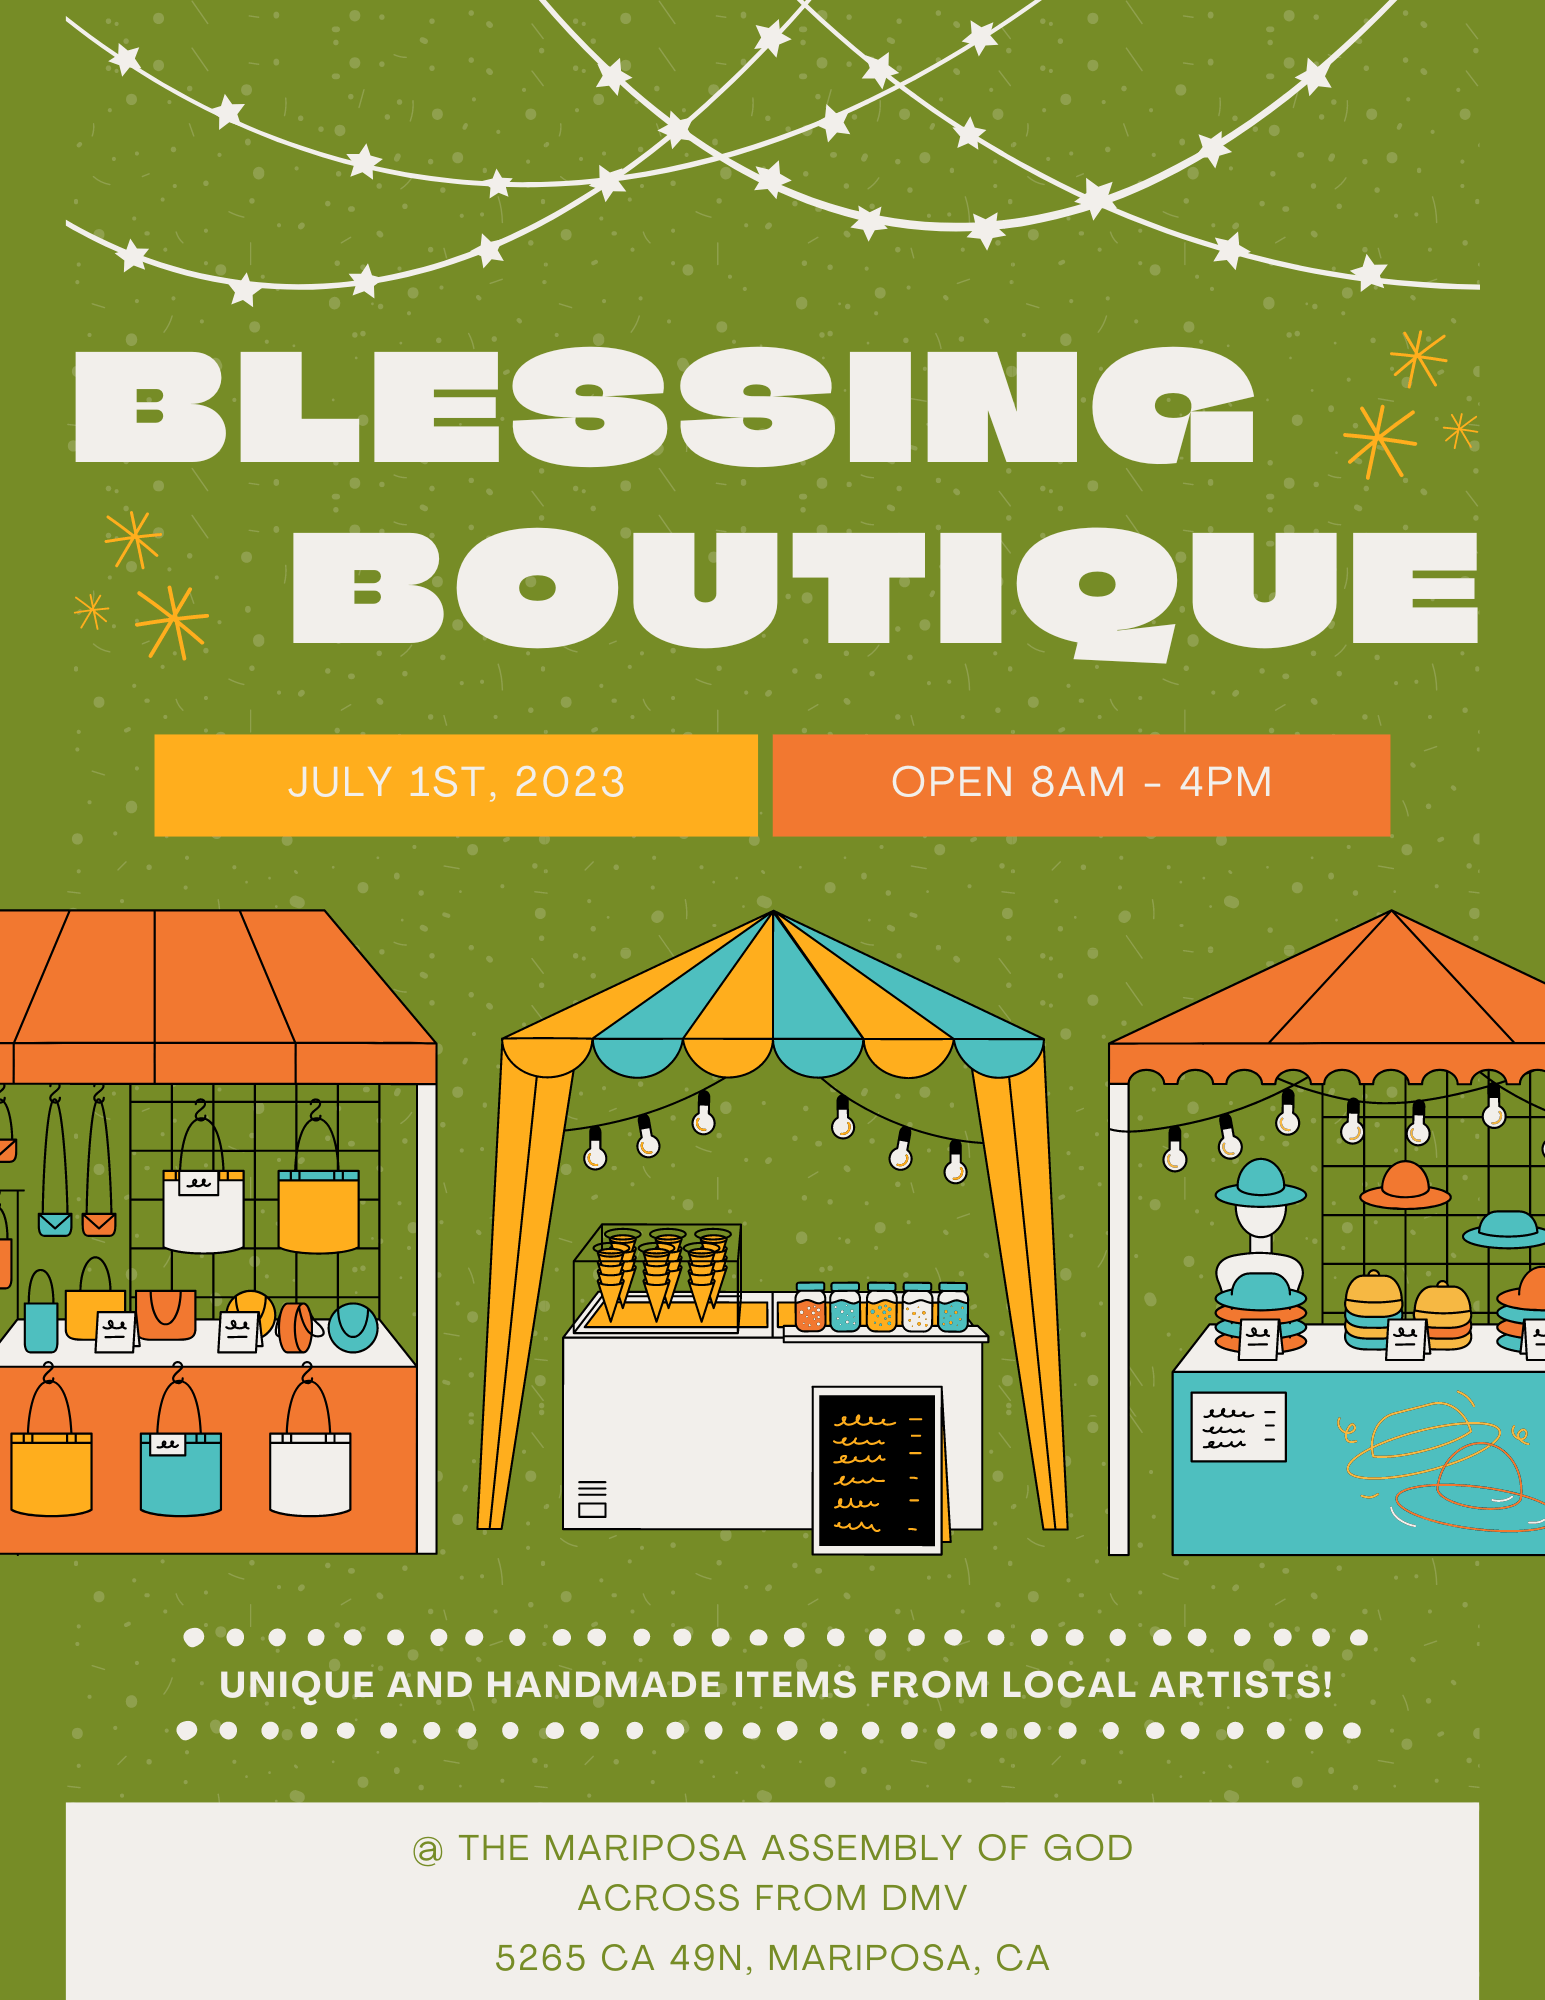 Flyer for Blessing Boutique happening July 1, 2023 in Mariposa, CA at the Assembly of God across the street from the DMV. Open 8am to 4pm.